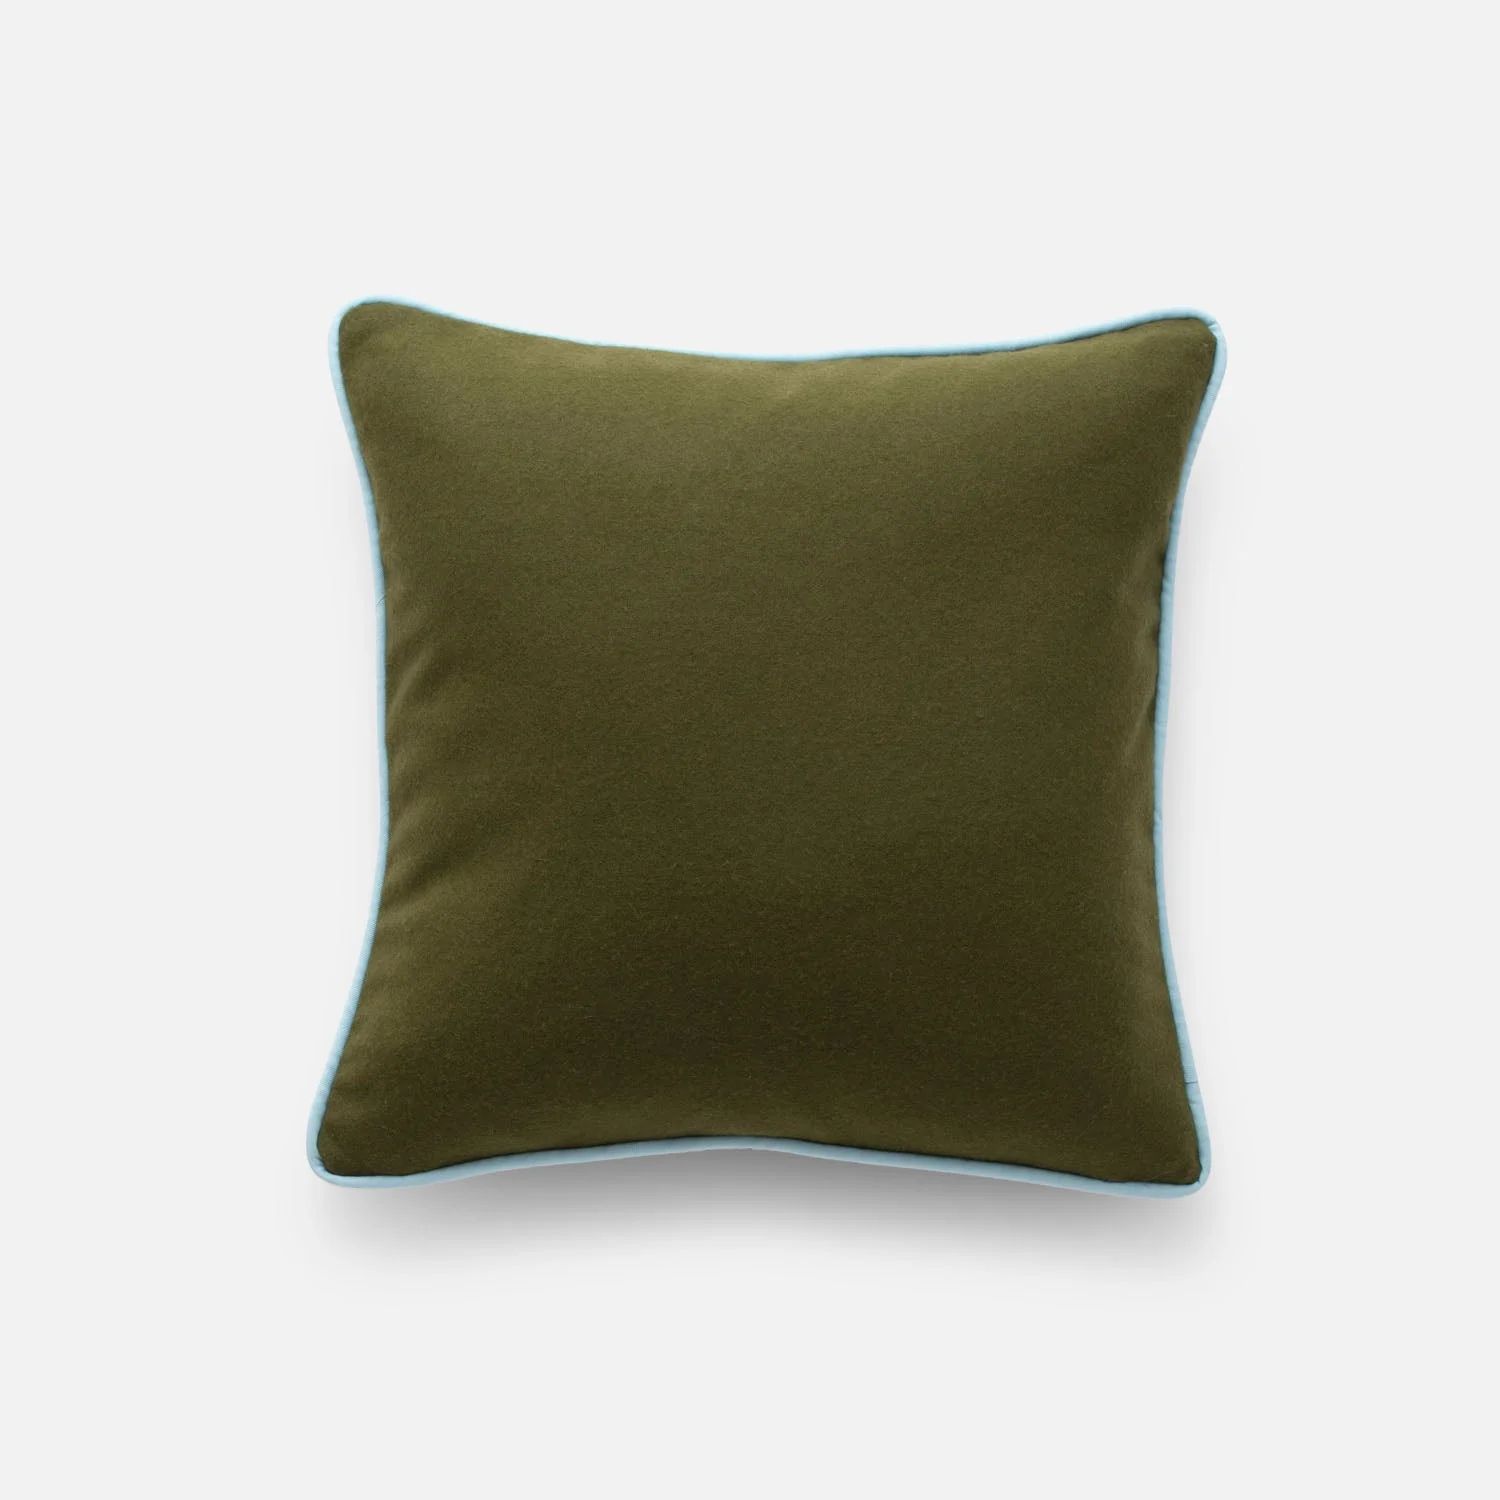 Classic Piped Pillow | Schoolhouse